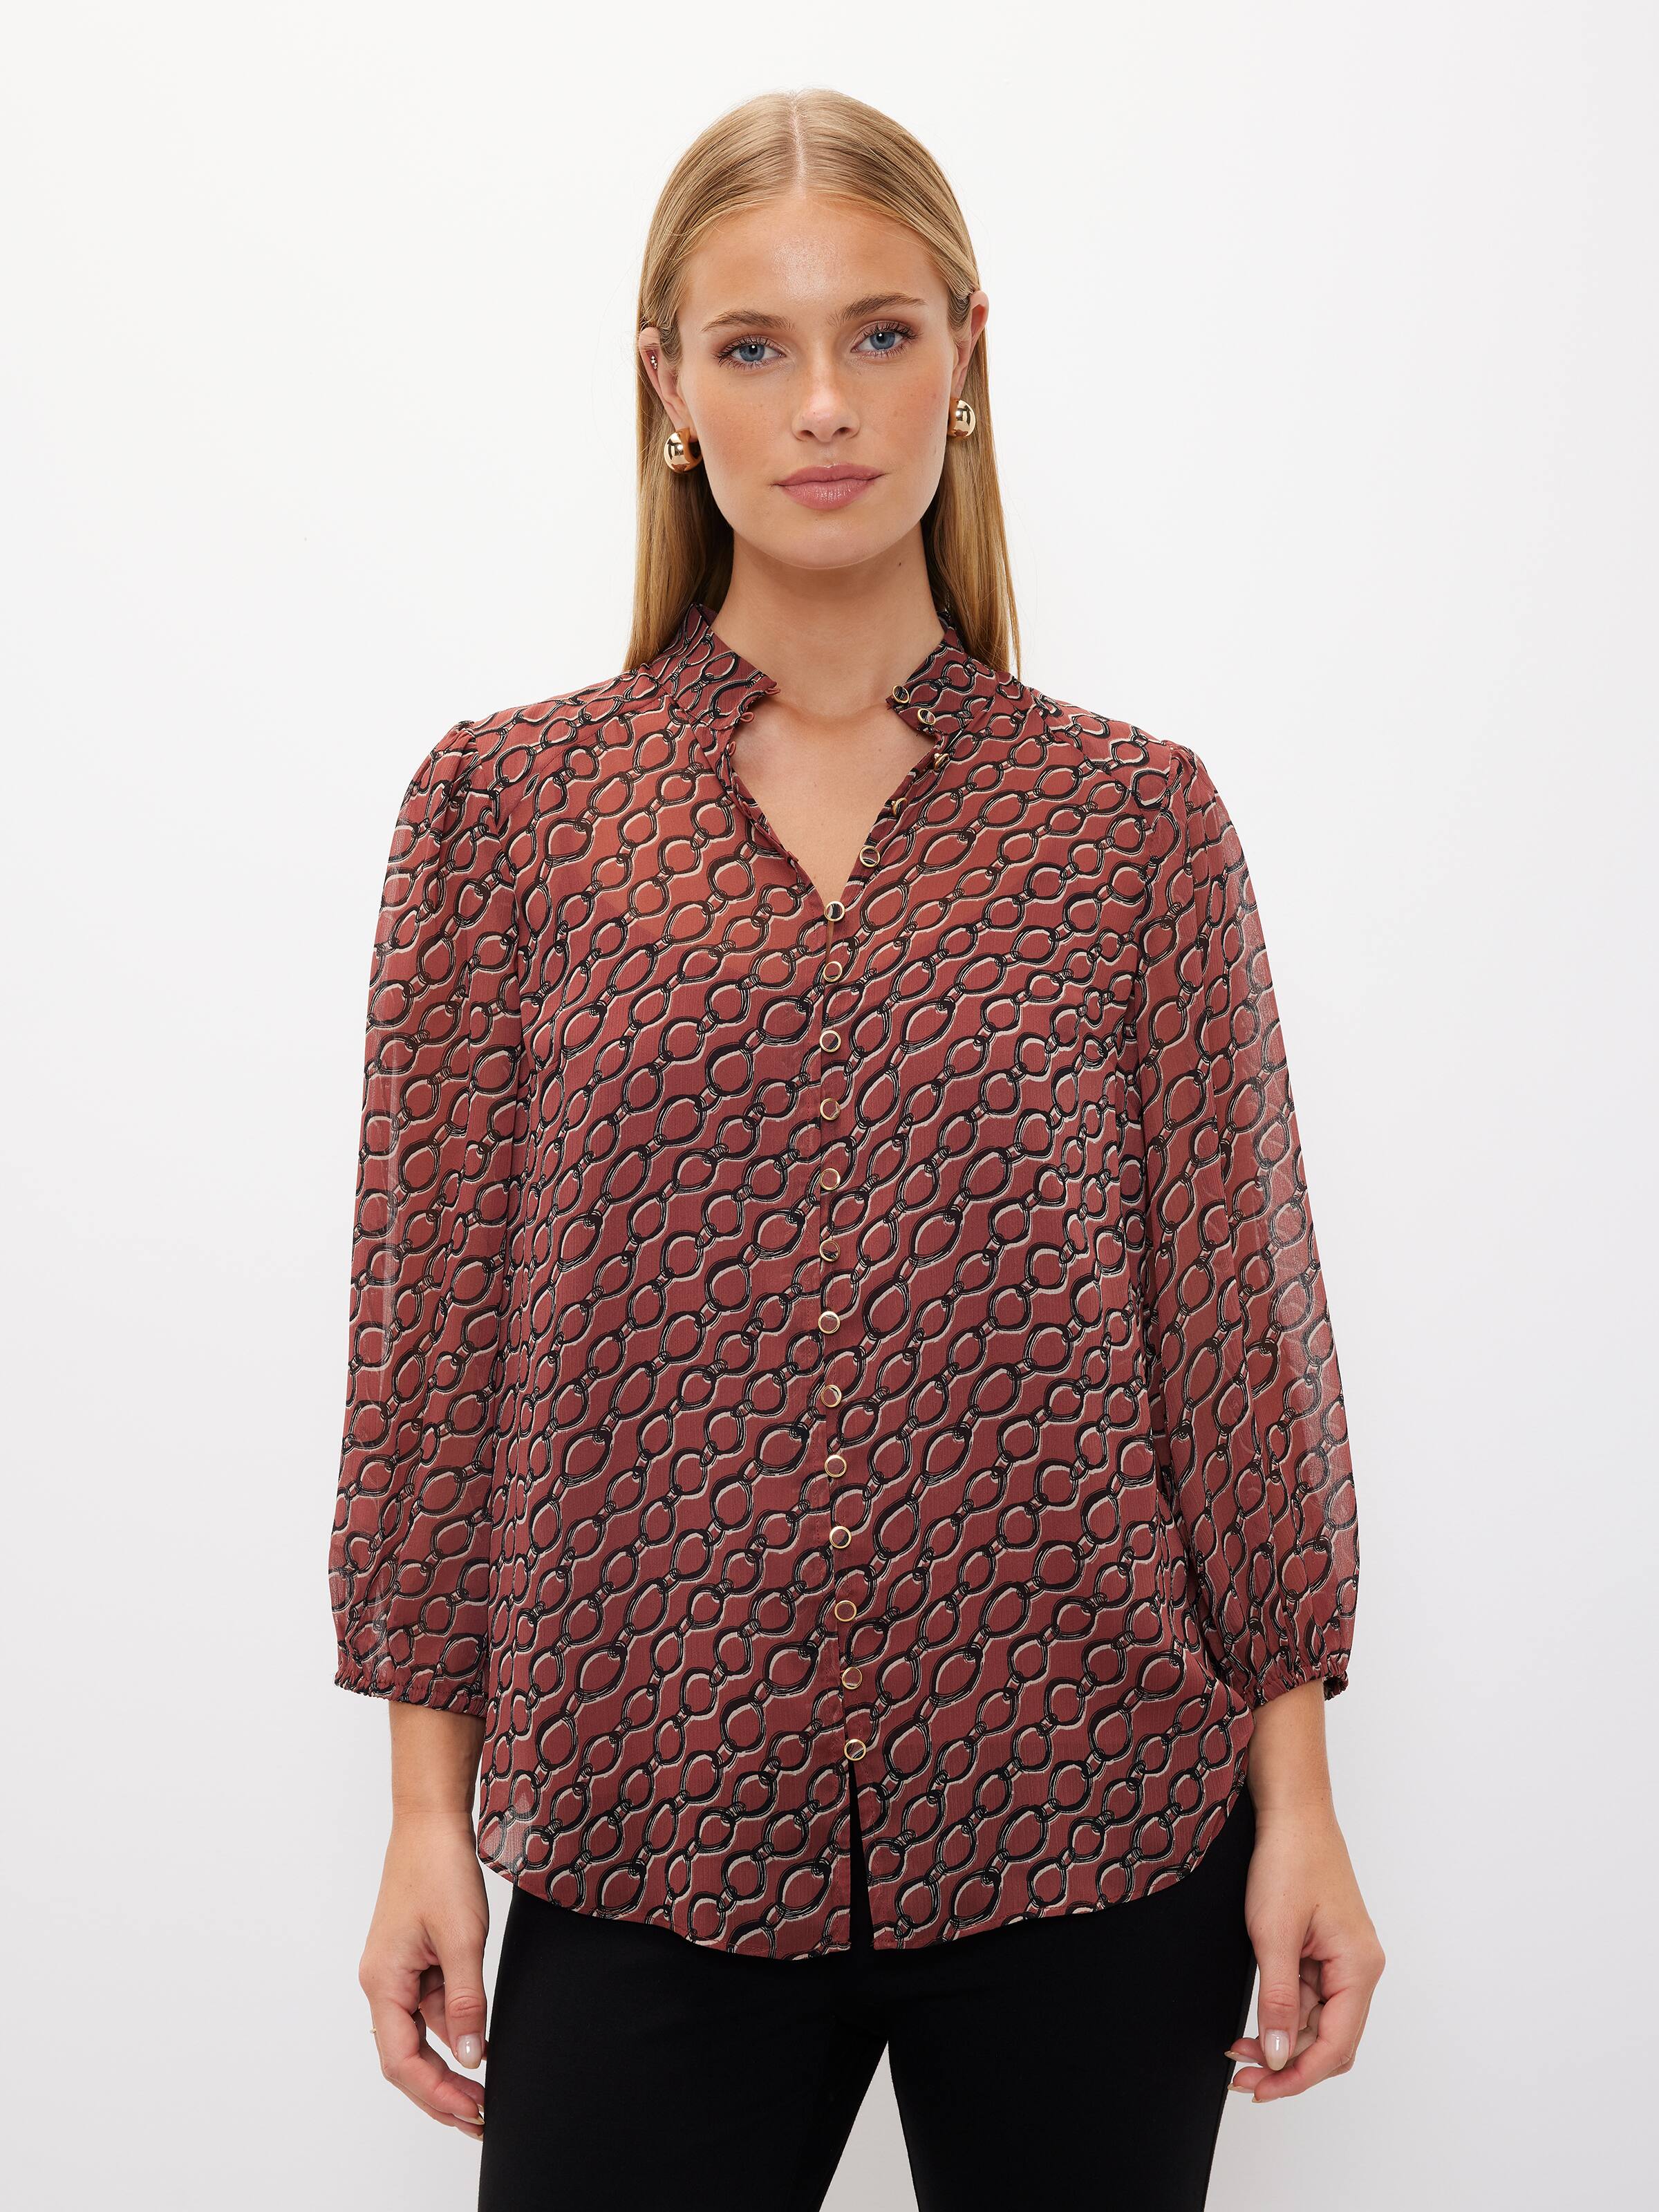 Work Tops for Women;Womens Western Tops 3/4 Sleeve Shirts for